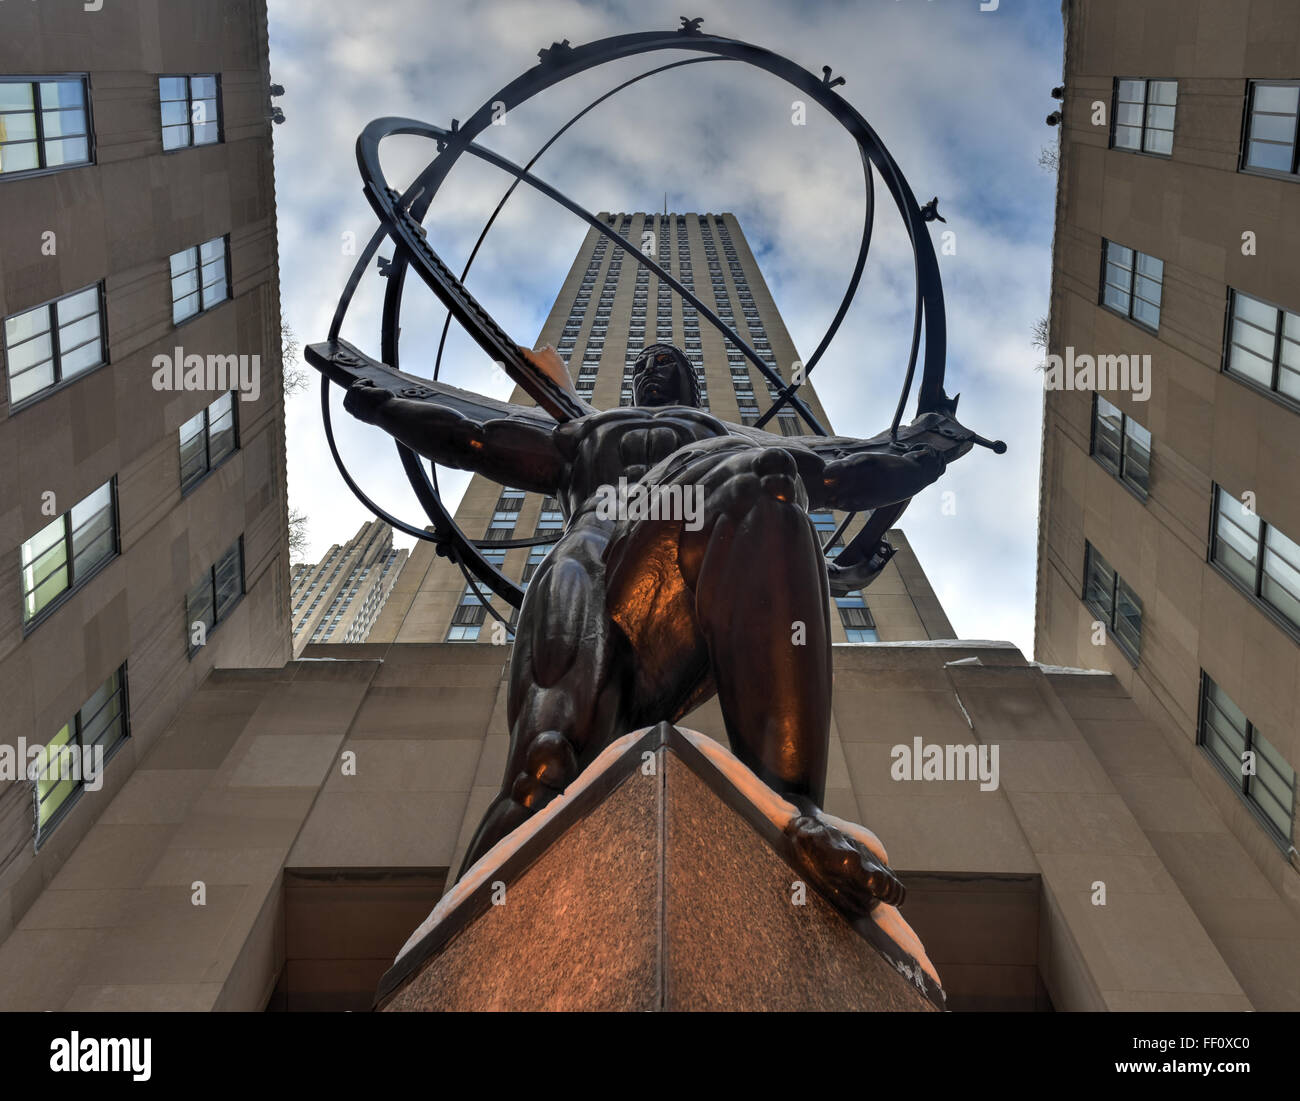 New York - January 24, 2016: Snow covered Atlas Statue at Rockefeller Center in New York. The Atlas Statue is a bronze statue in Stock Photo